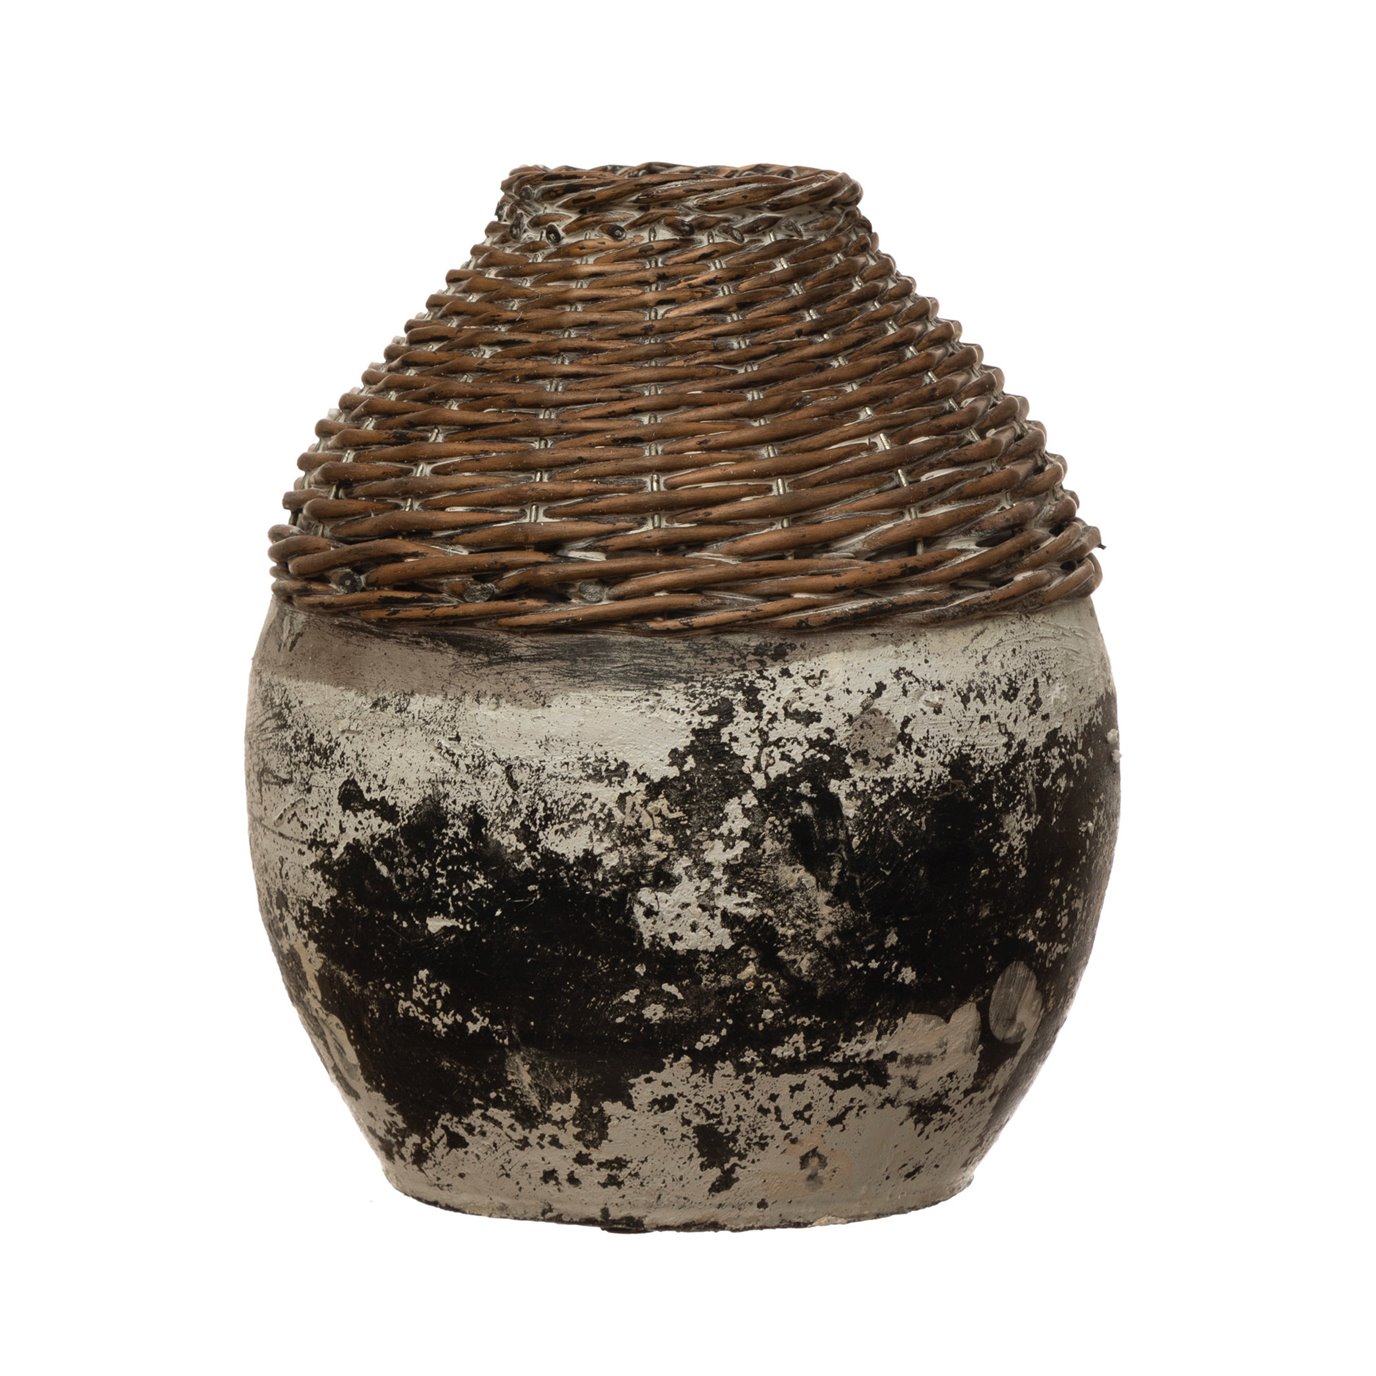 Hand-Woven Rattan & Clay Vase, Distressed White (Each One Will Vary)